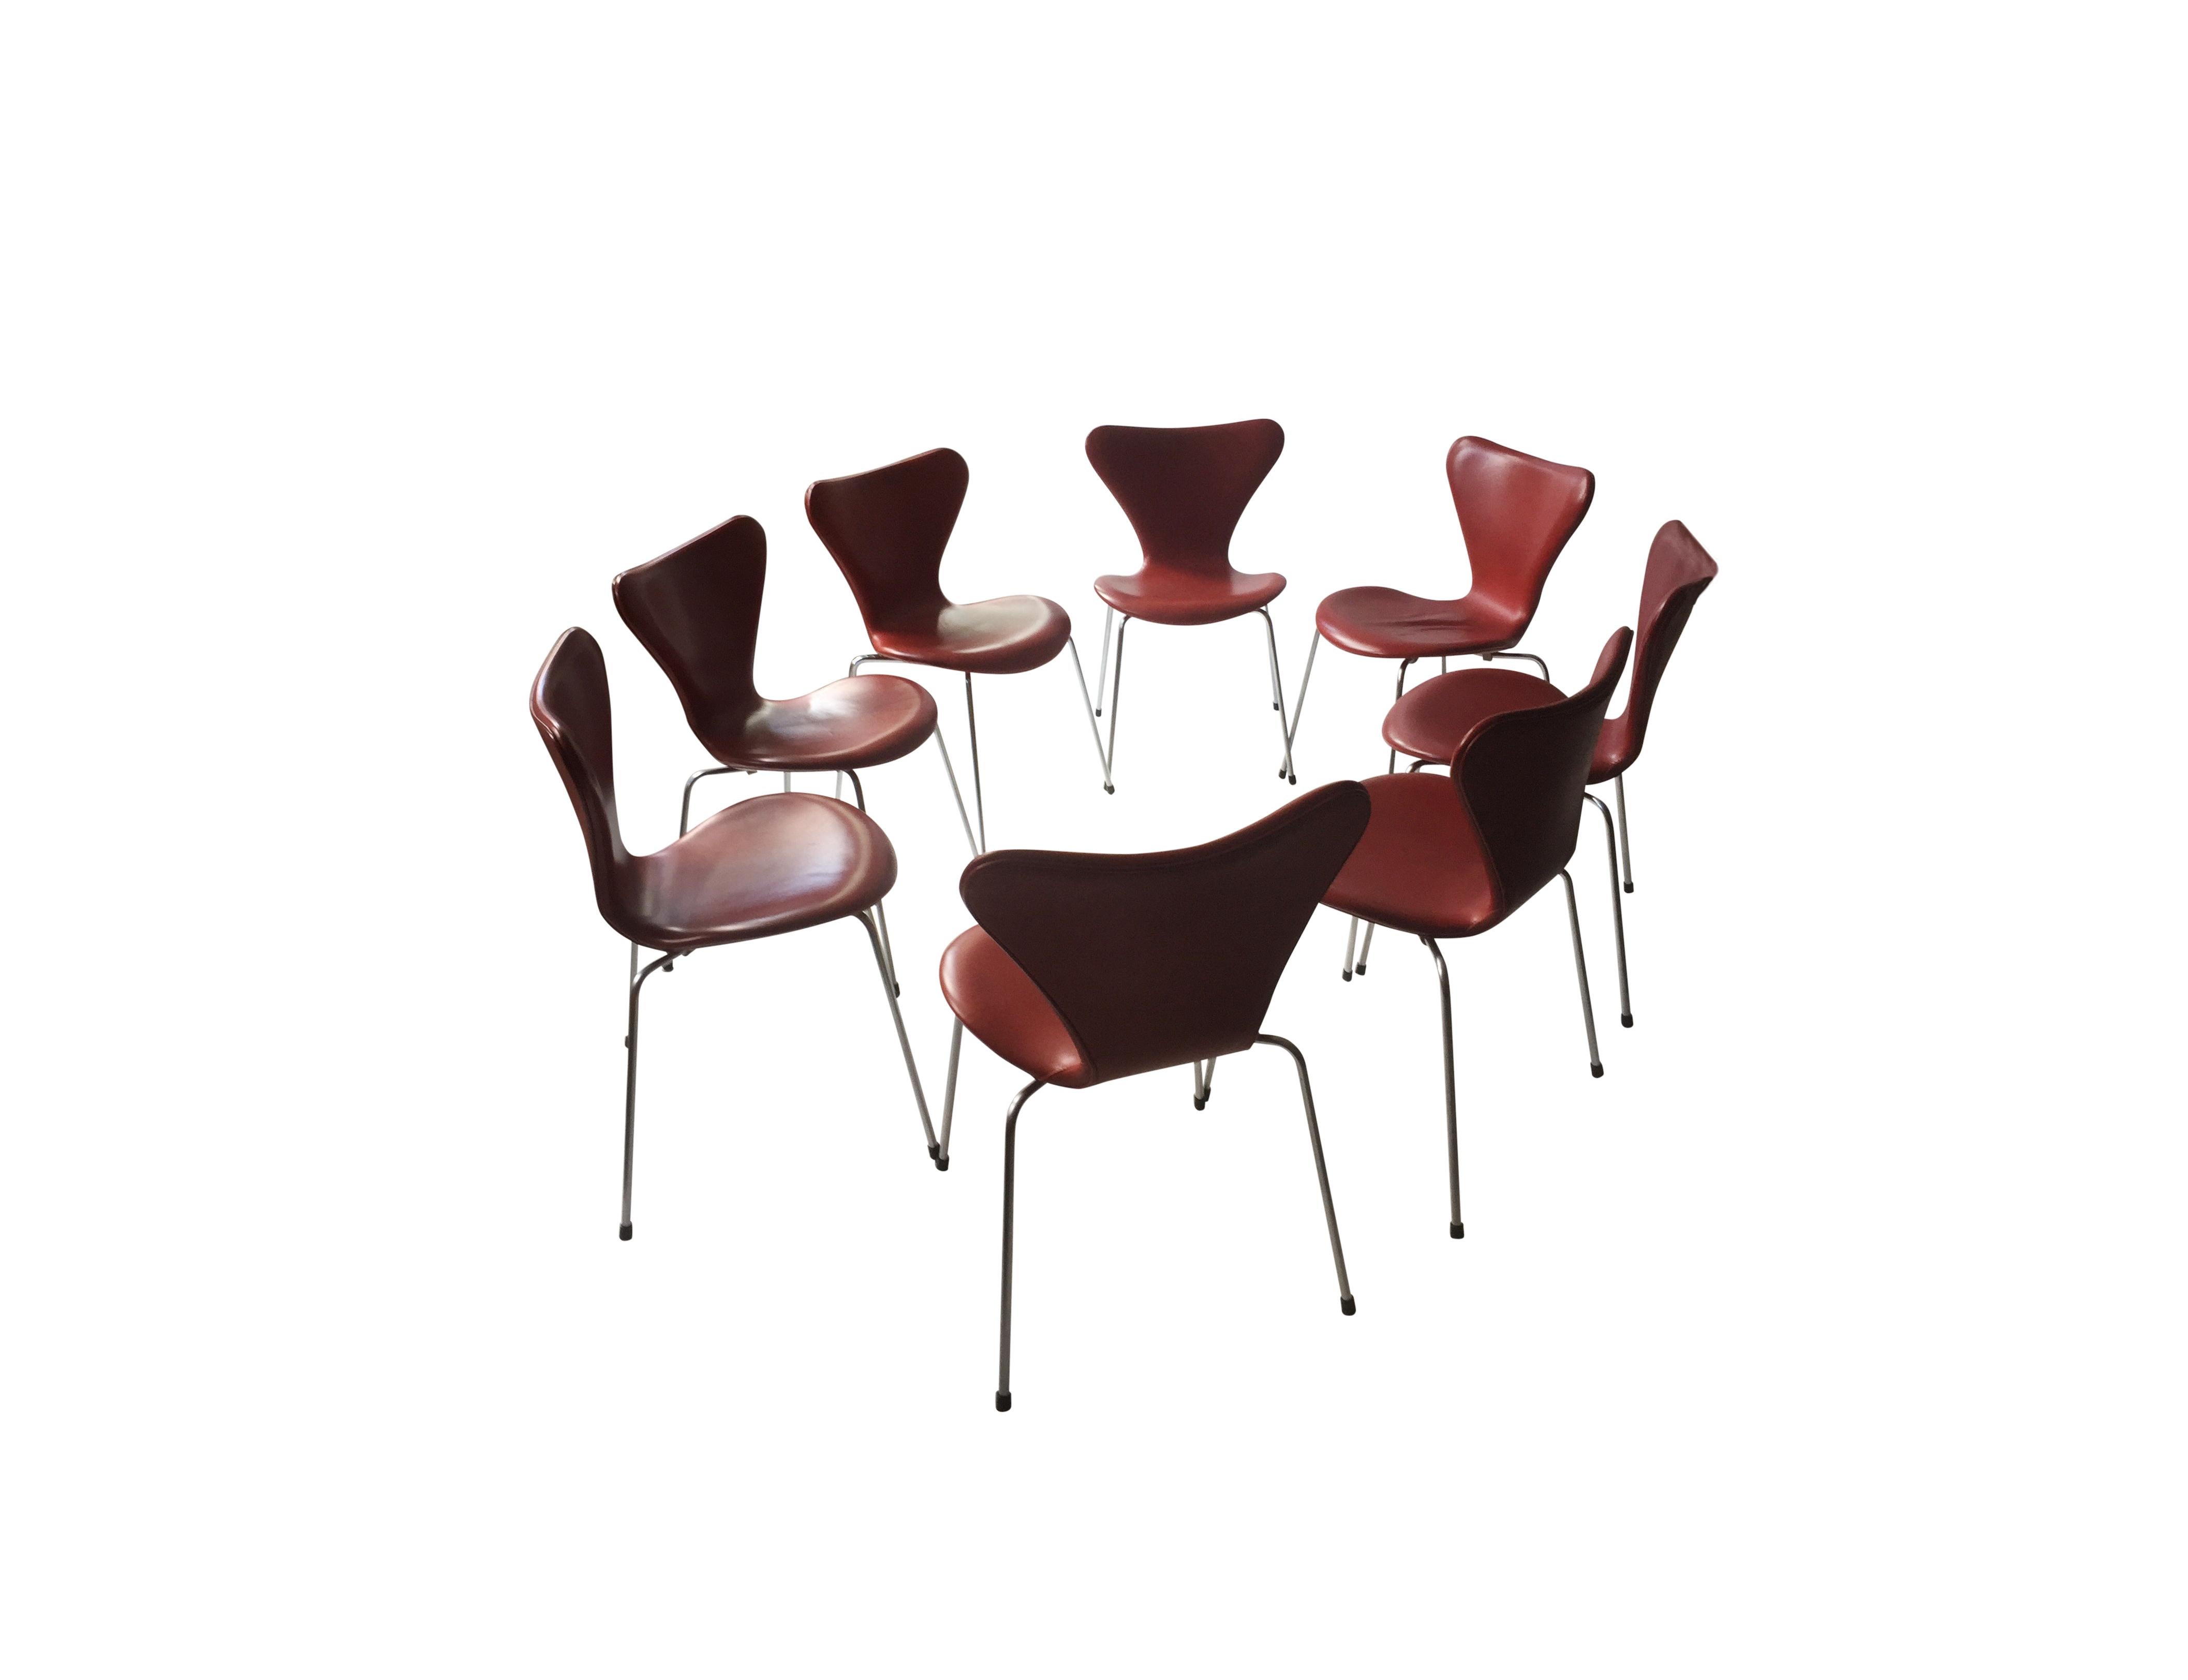 Mid-20th Century Set of Eight Danish Dining Chairs in Indian Red Leather by Arne Jacobsen 1960s For Sale